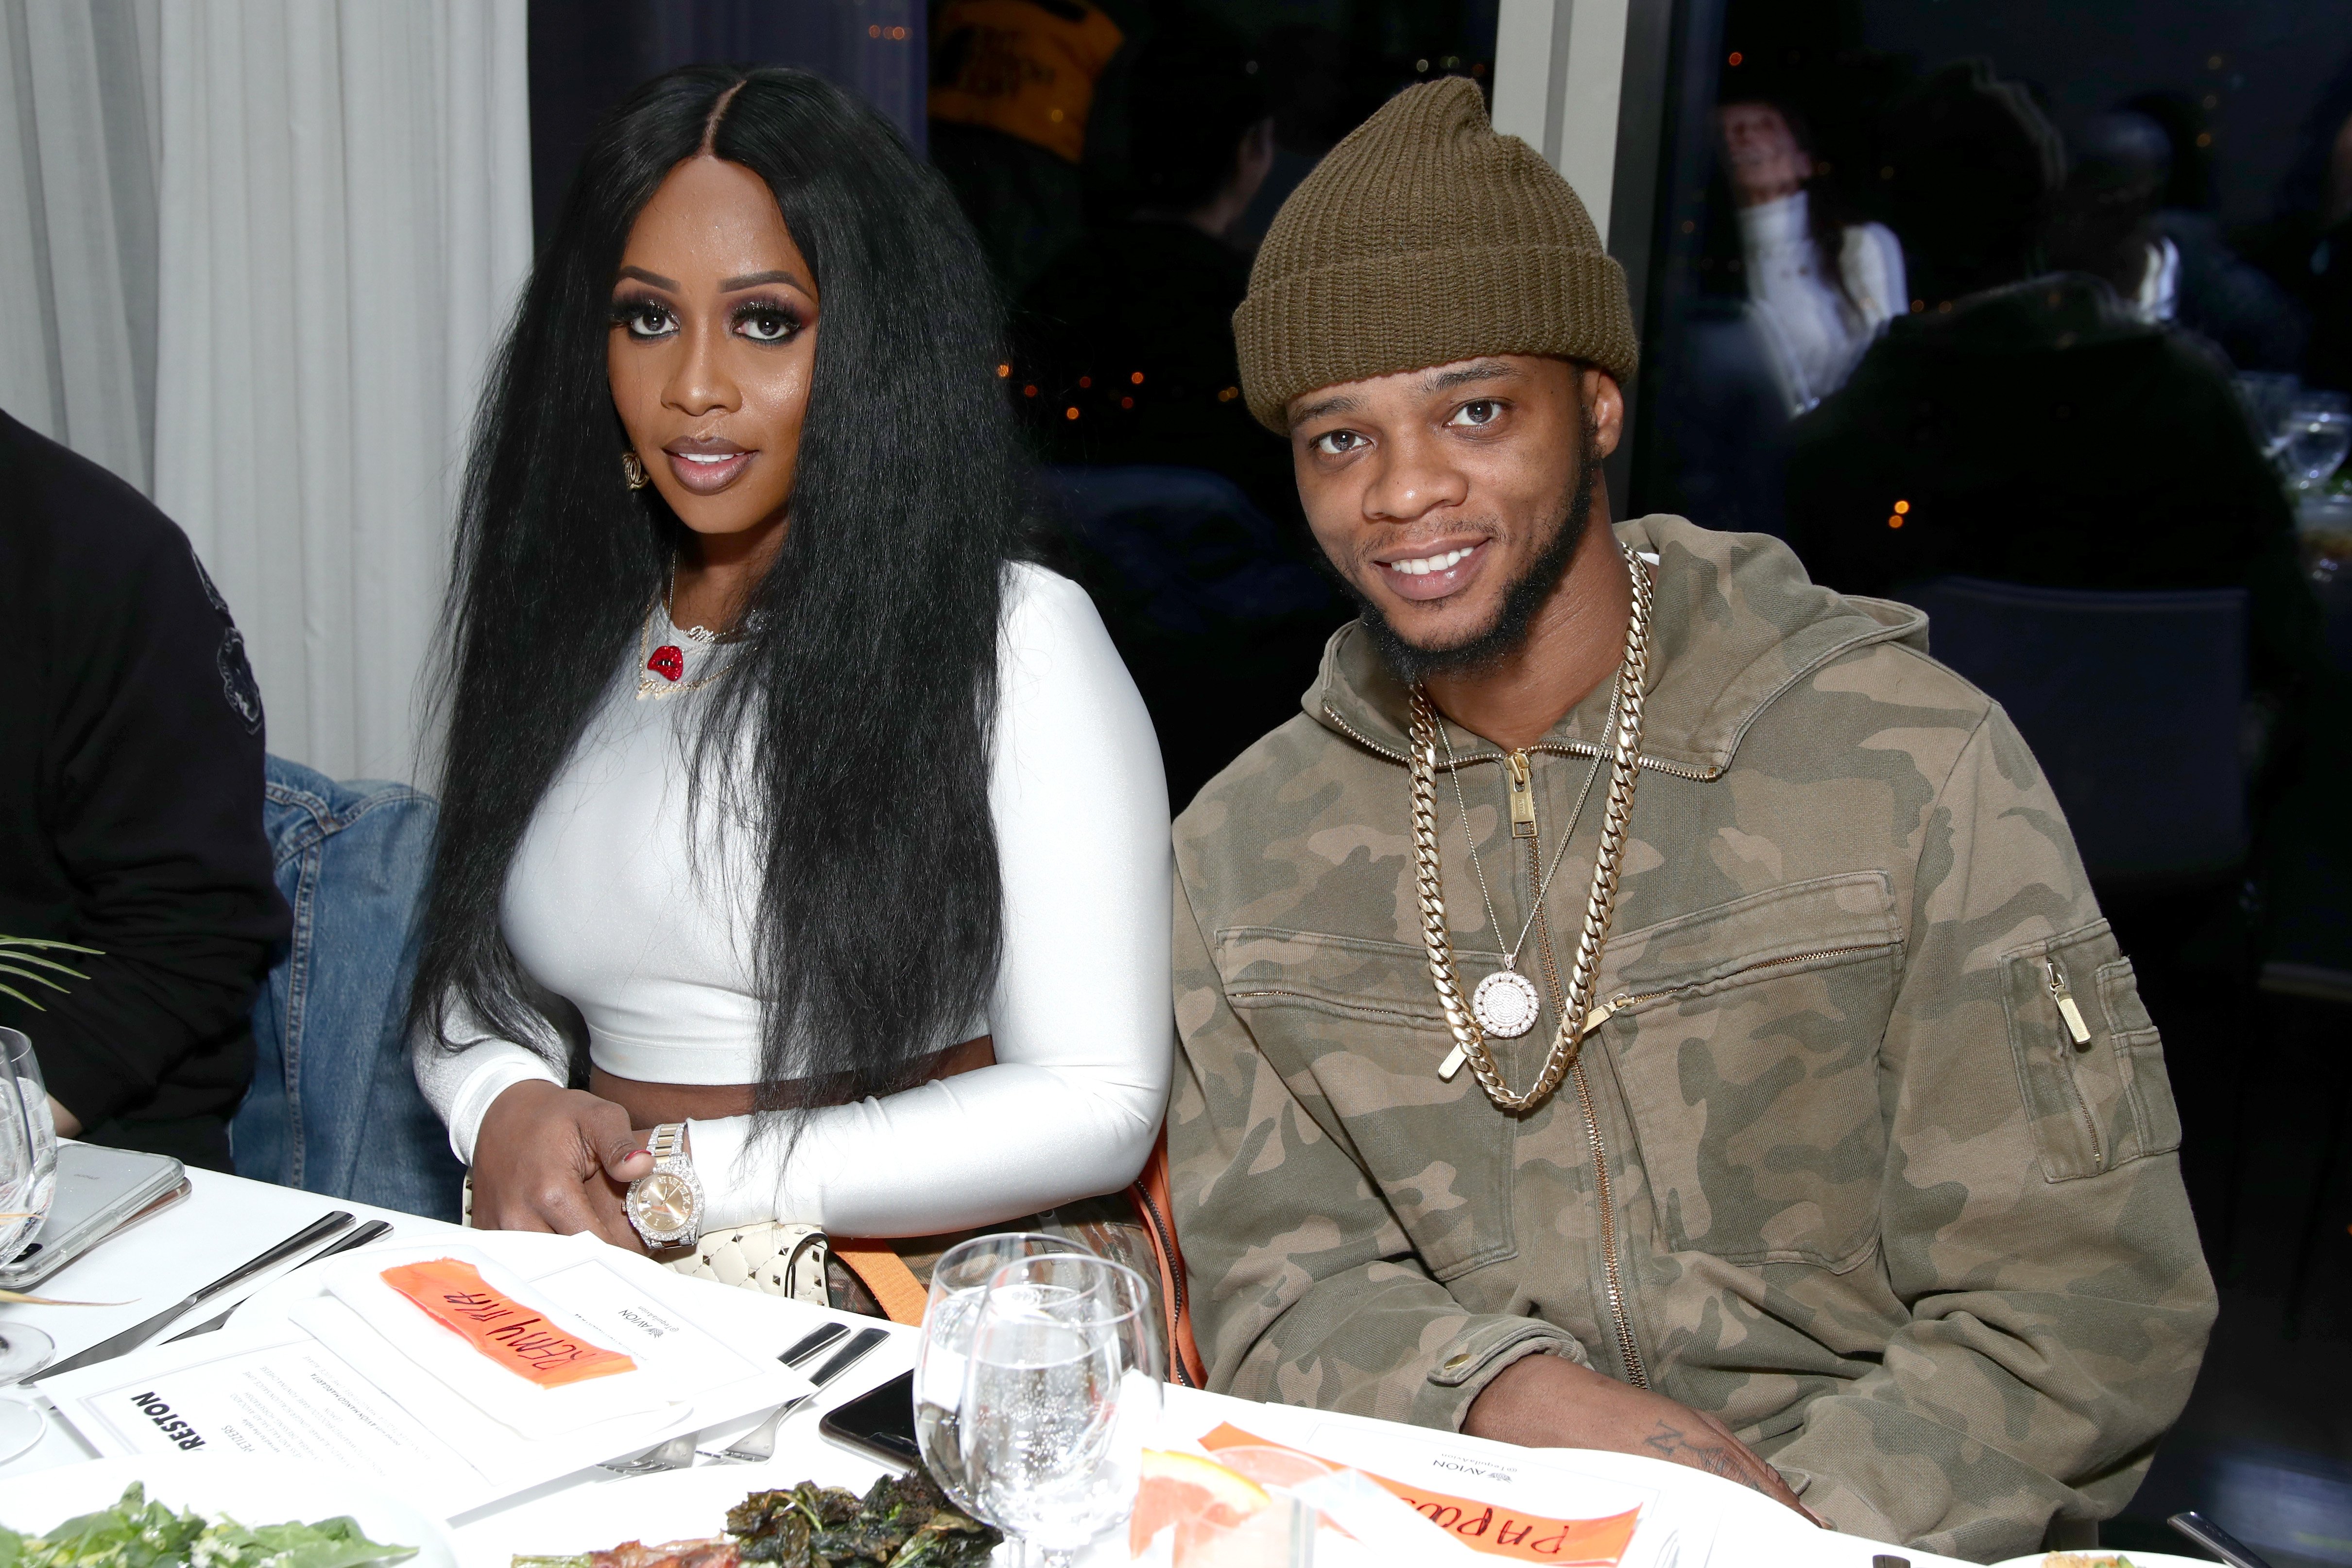 Rapper Remy Ma and Papoose Mackie at the Heron Preston + Tequila Avion Dance Party in 2018 | Source: Getty Images